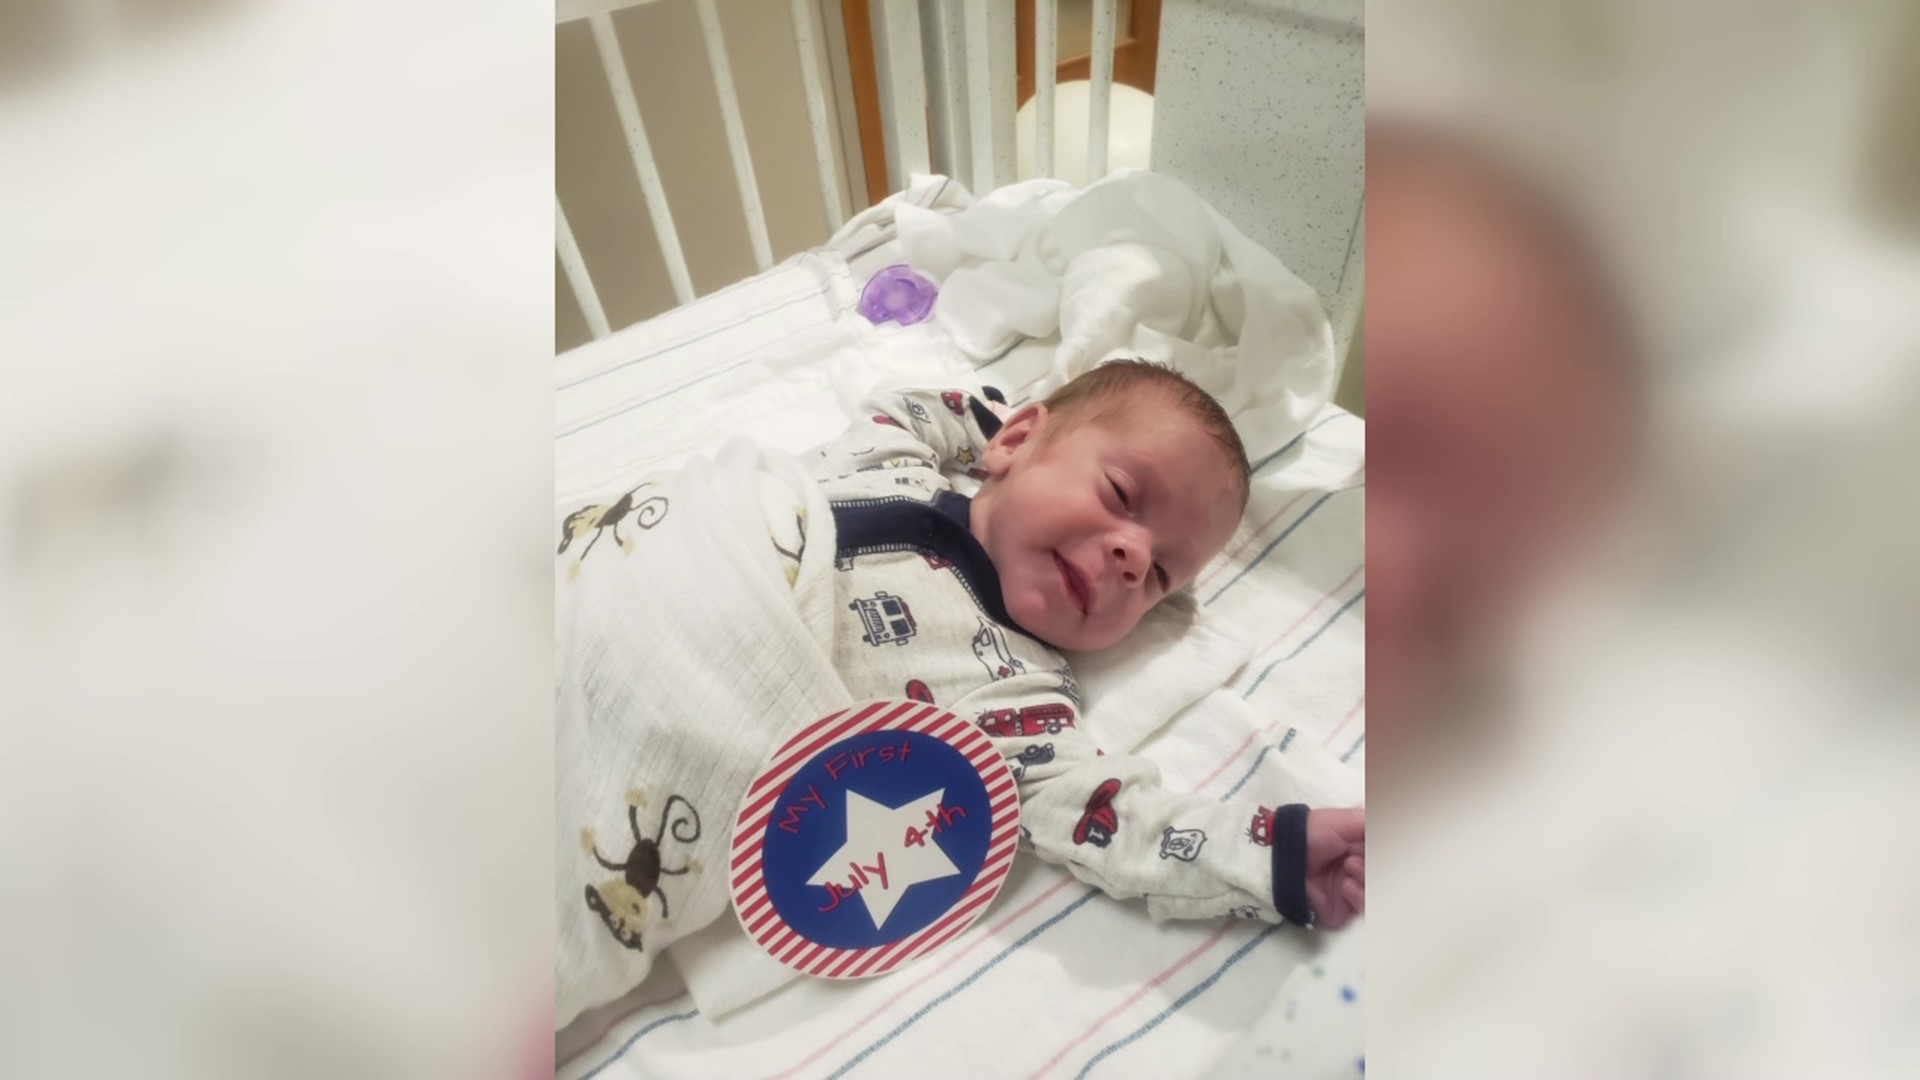 Babies born before the 37th week of pregnancy are considered premature. Newswatch 16's Nikki Krize spoke with a family all too familiar with preterm birth.